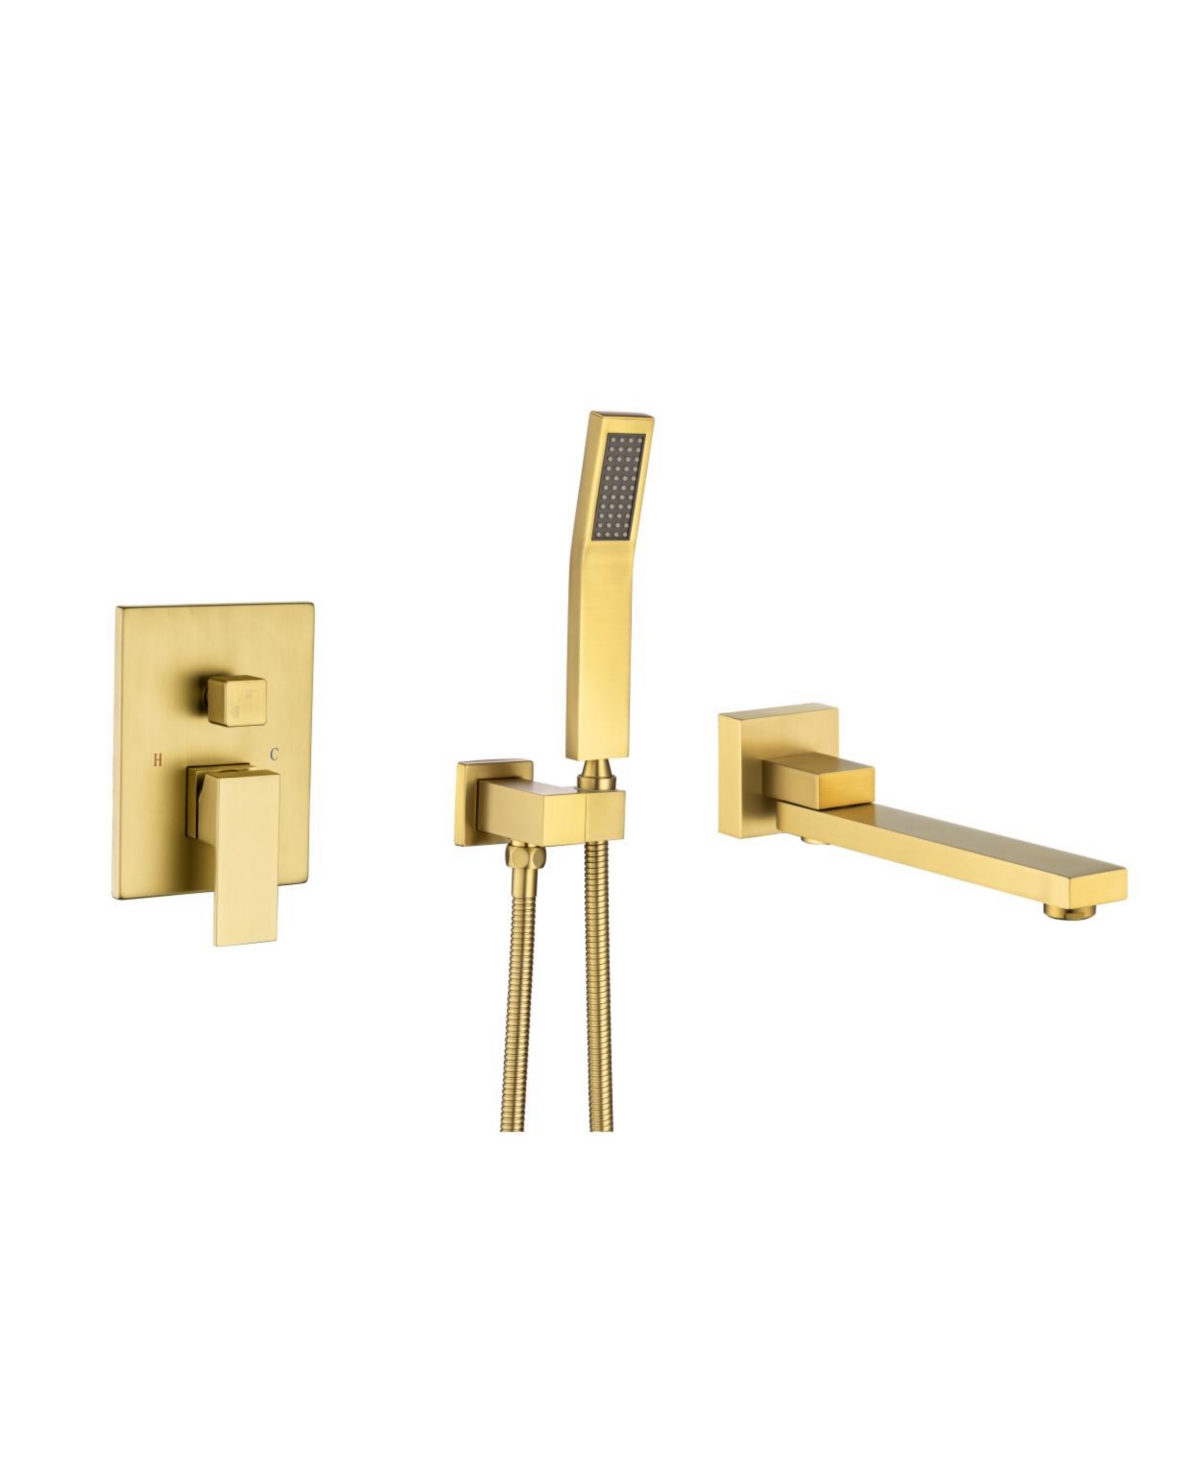 Waterfall Wall Mounted Tub Faucet with Hand Shower - Gold